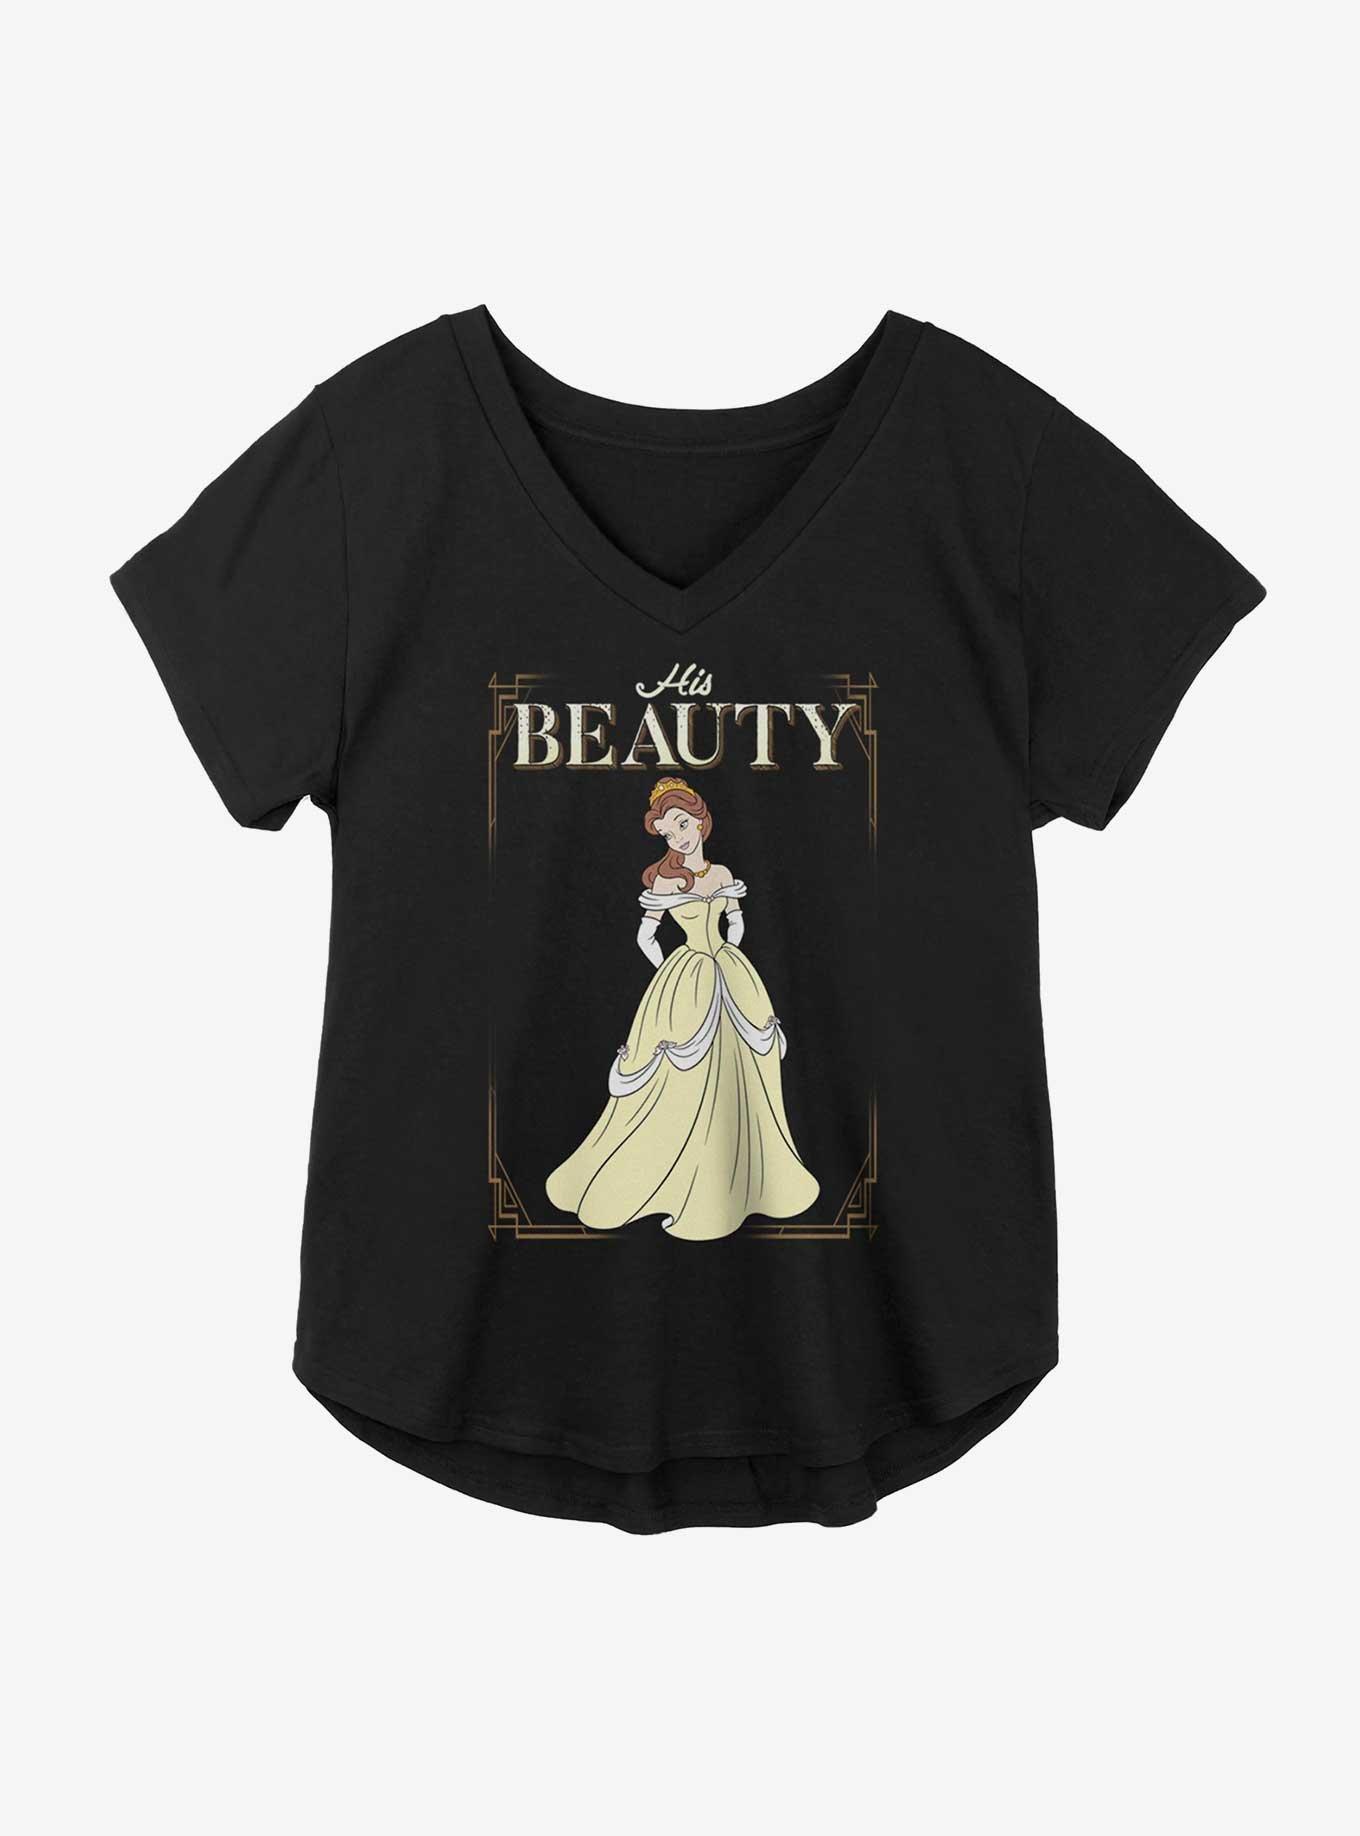 Disney Beauty And The Beast His Beauty Belle Girls Plus Size T-Shirt, BLACK, hi-res